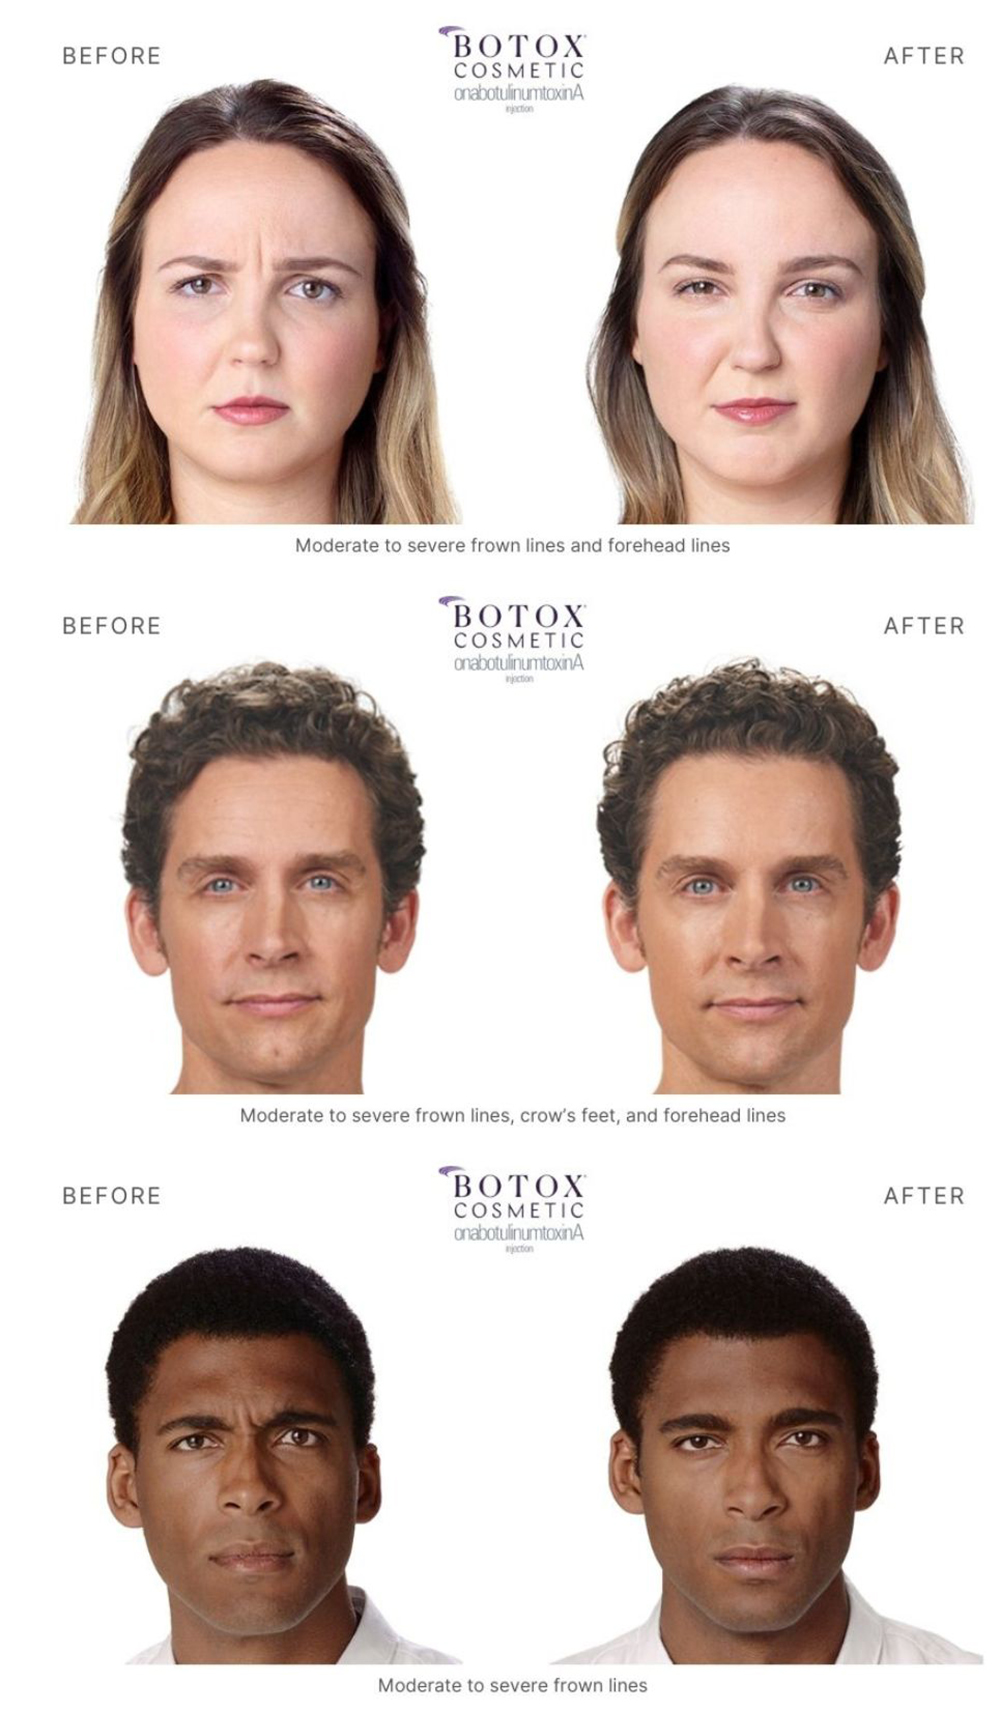 Before and after botox images of one woman and two men with restored youthful appearance.